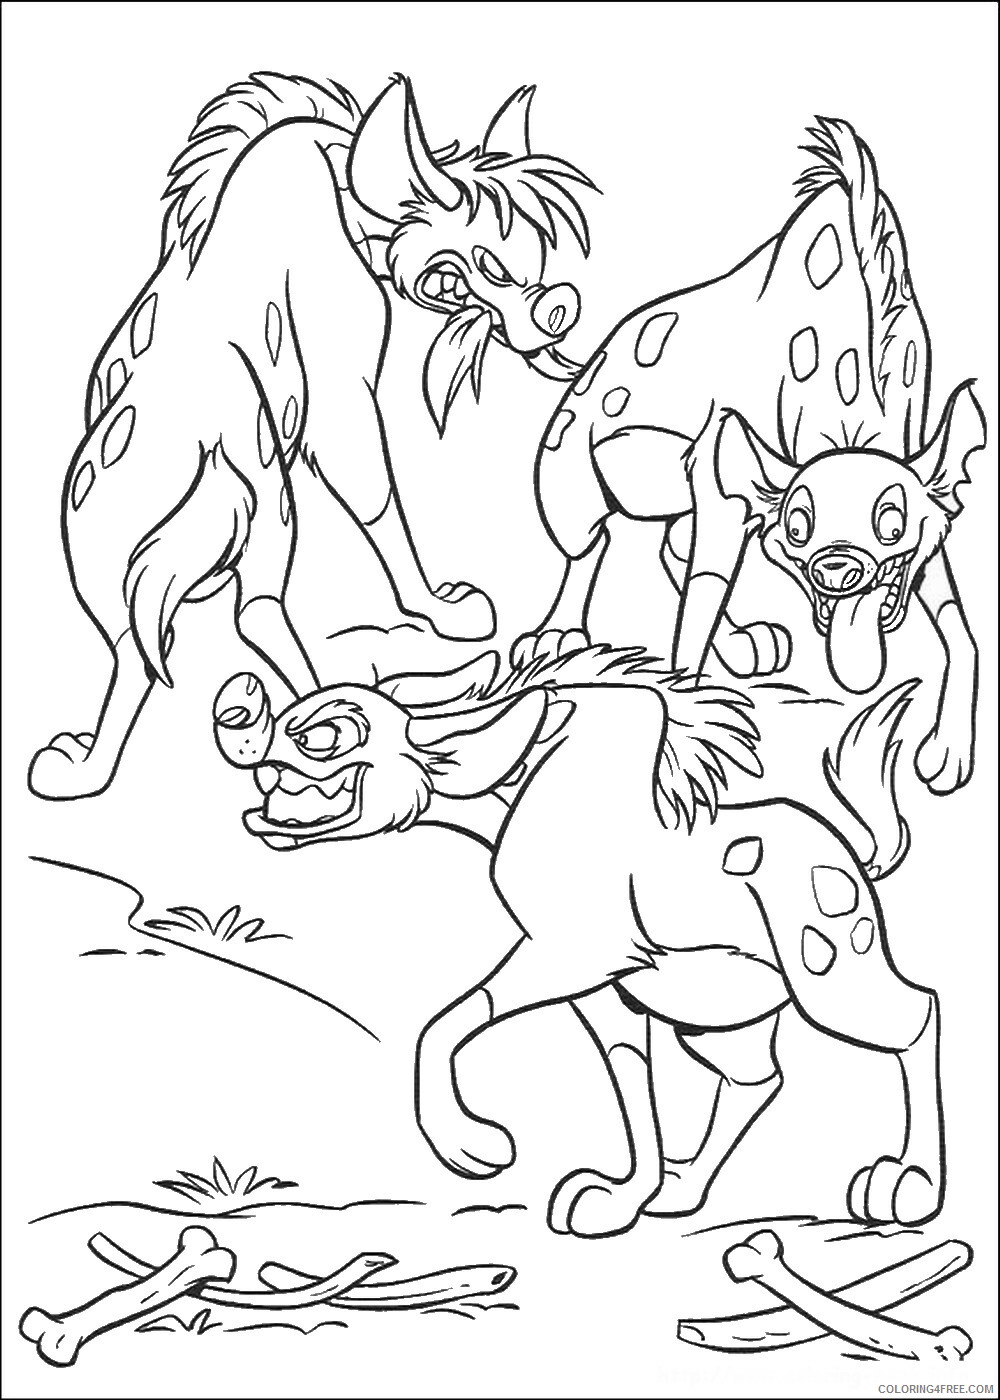 The Lion King Coloring Pages TV Film lionking_51 Printable 2020 09173 Coloring4free